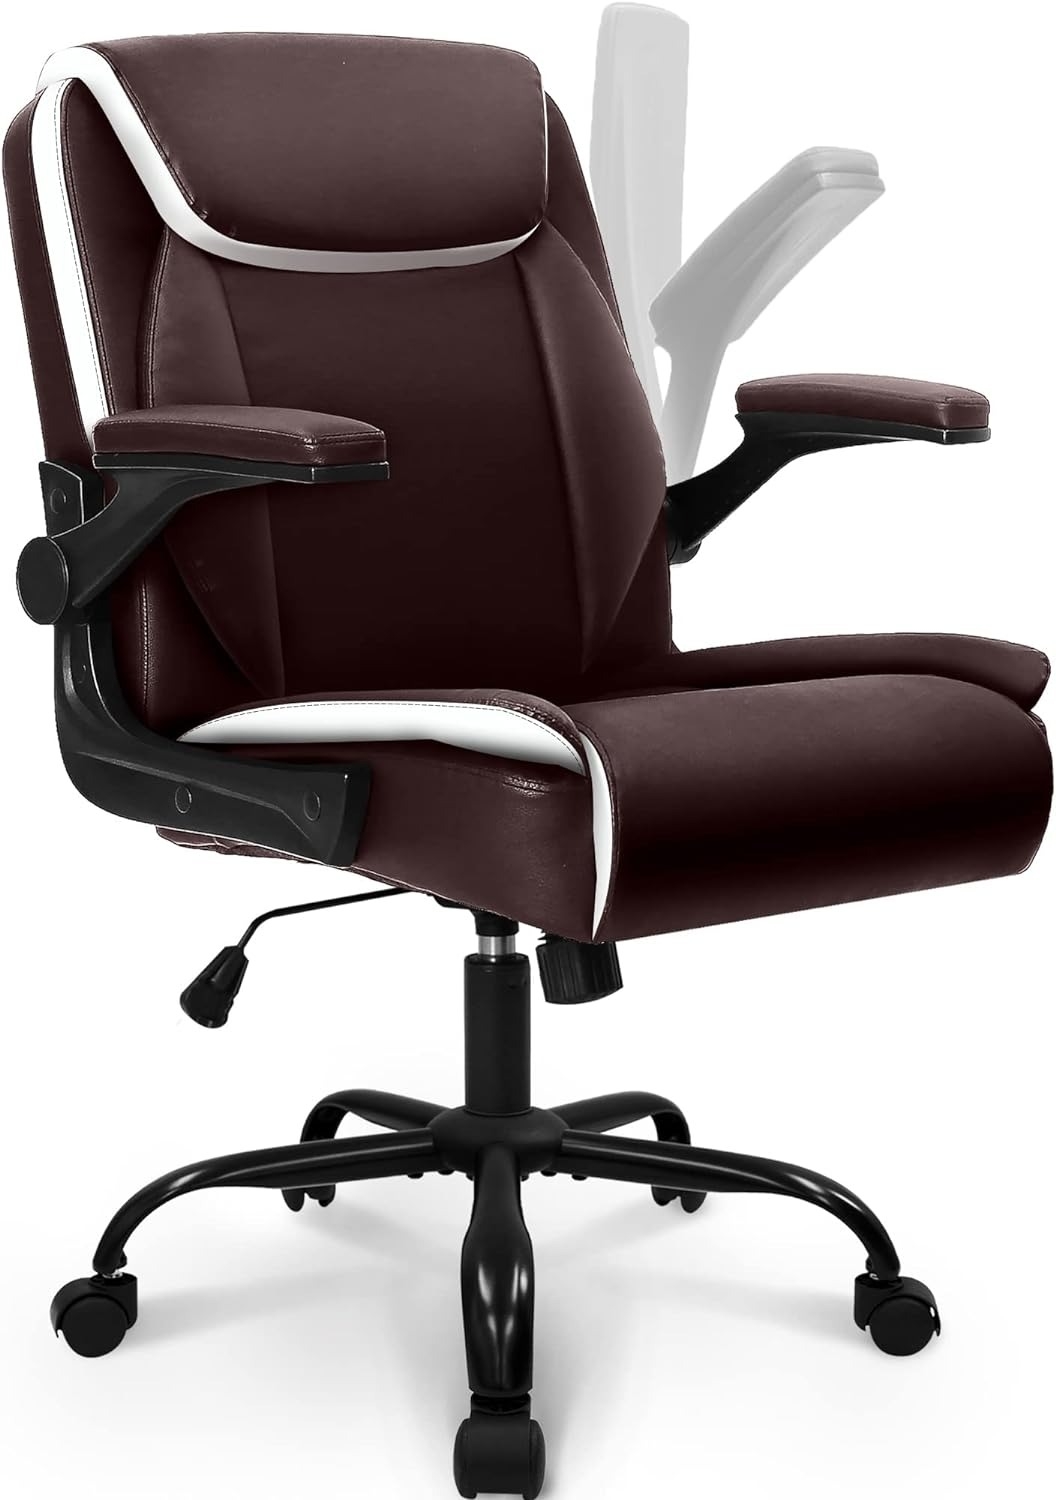 Ergonomic office chair with adjustable armrests and headrest on wheels